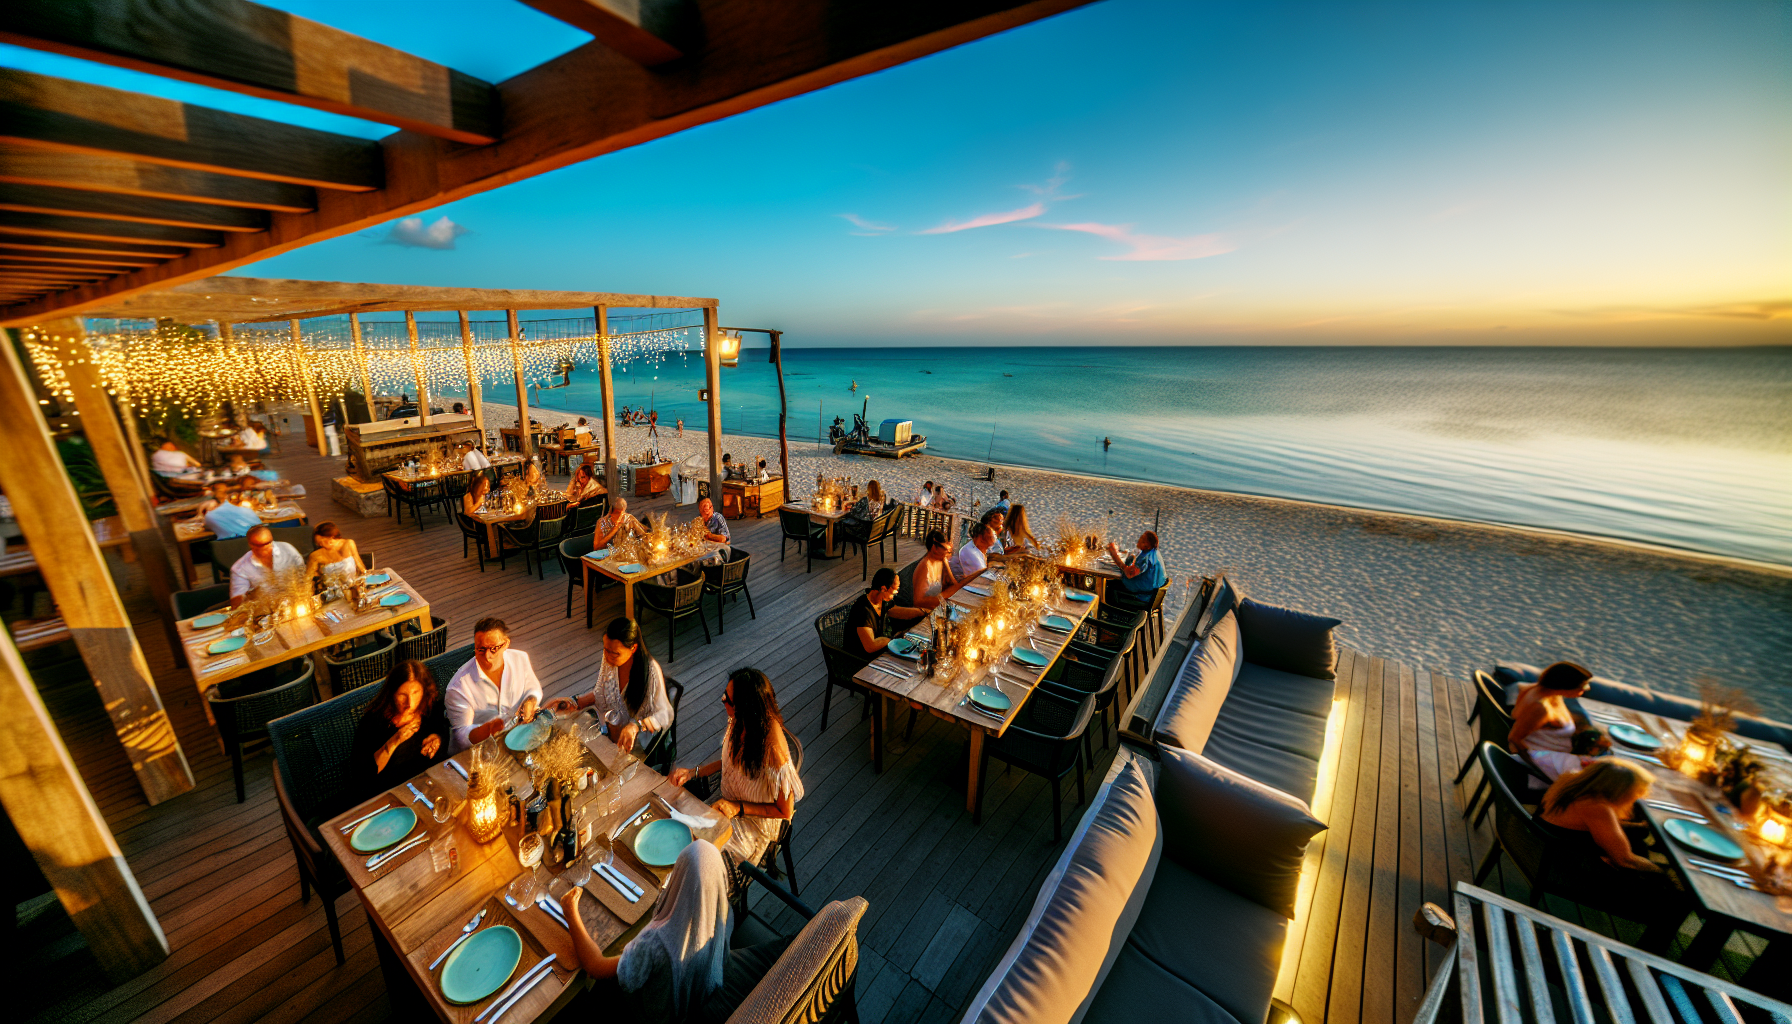 Beachfront dining with a view at Lona Cocina & Tequileria